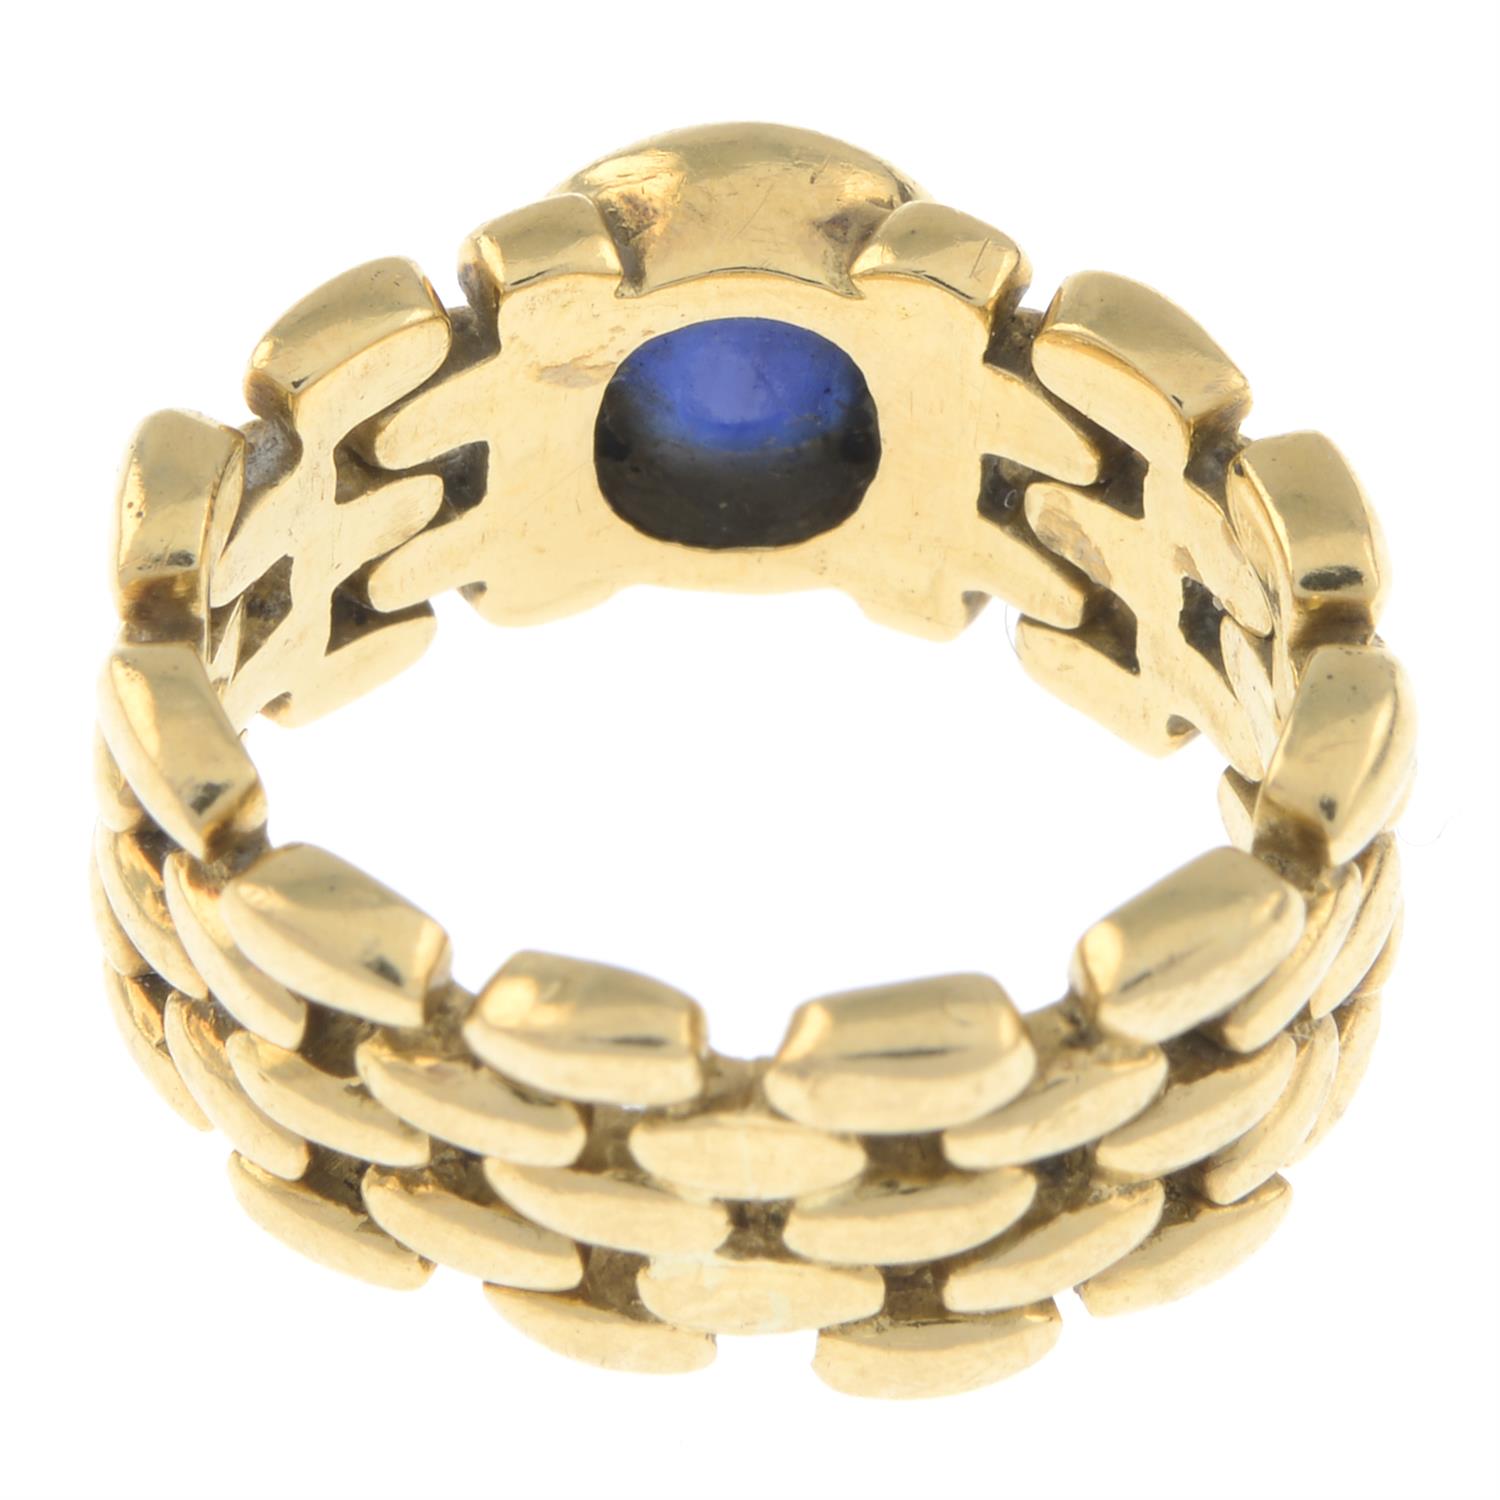 Sapphire articulated ring - Image 3 of 3